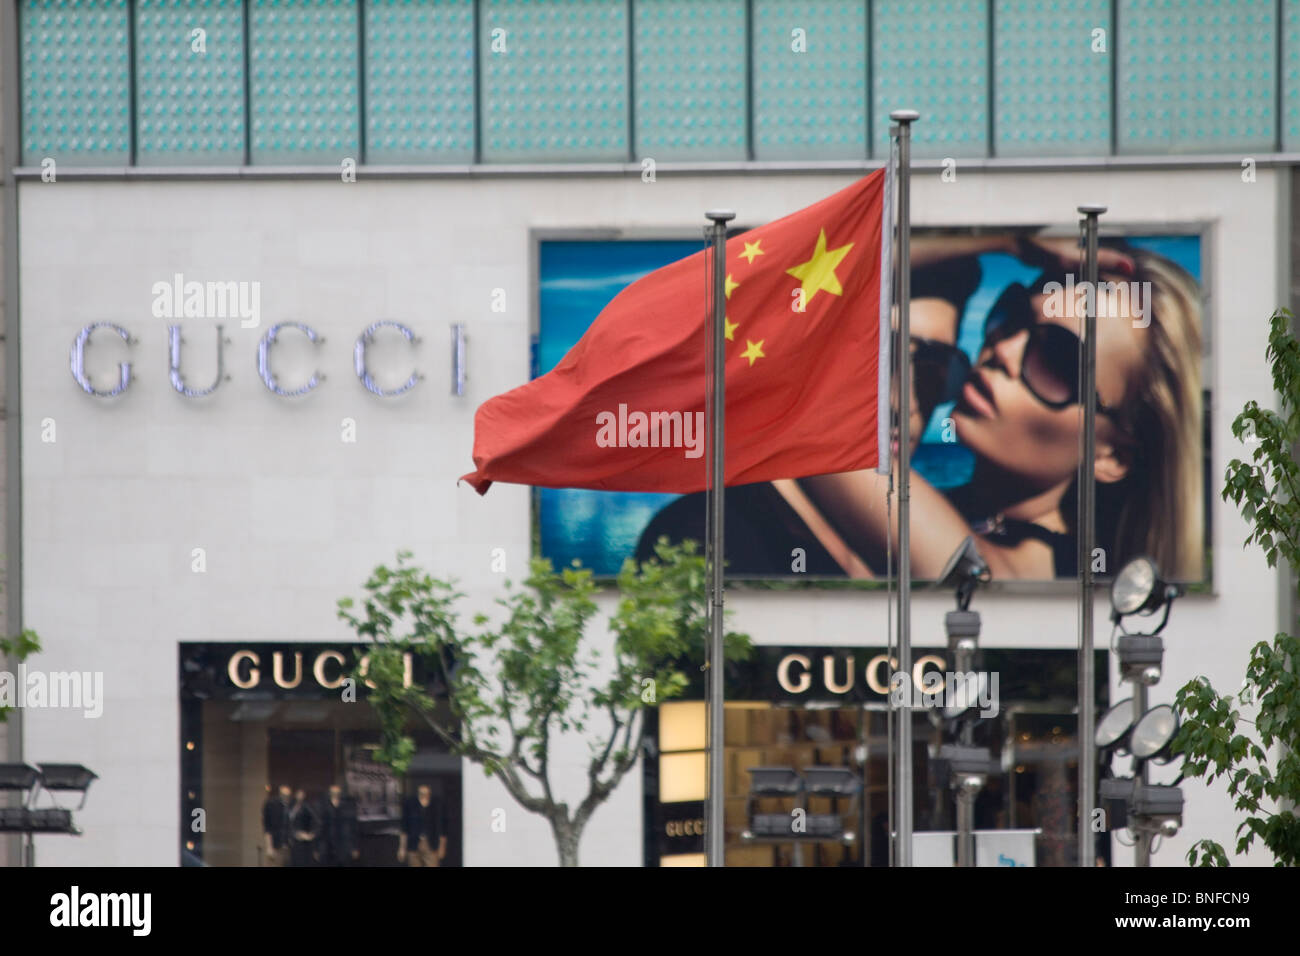 Chinese communist flag flutters in front of Gucci shop, Shanghai, China Stock Photo